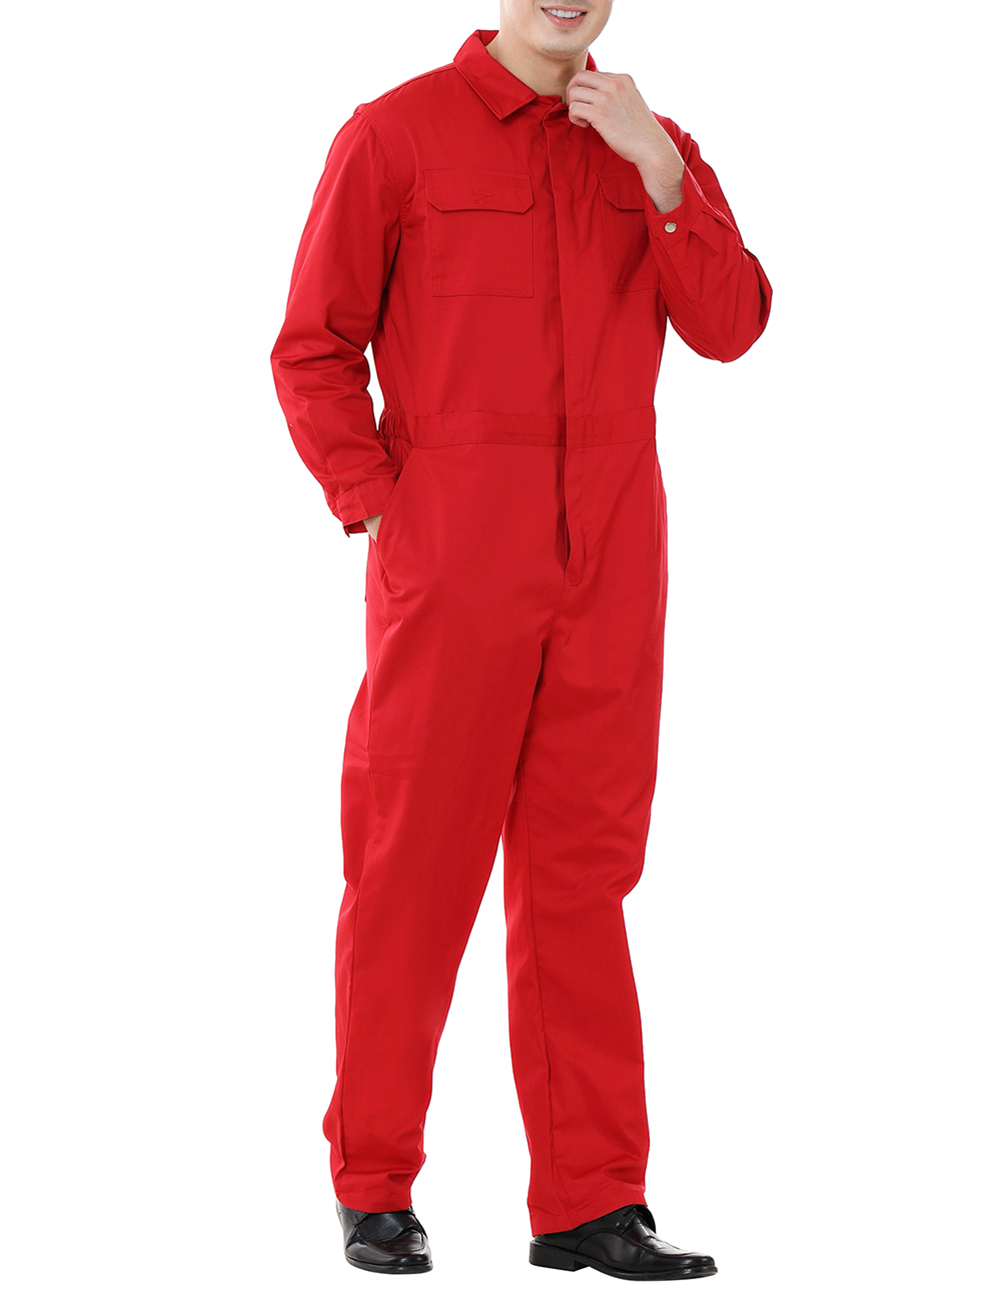 TOPTIE Workwear Mechanic Coverall 8.5 Oz Polyester Cotton Blend Size Regular